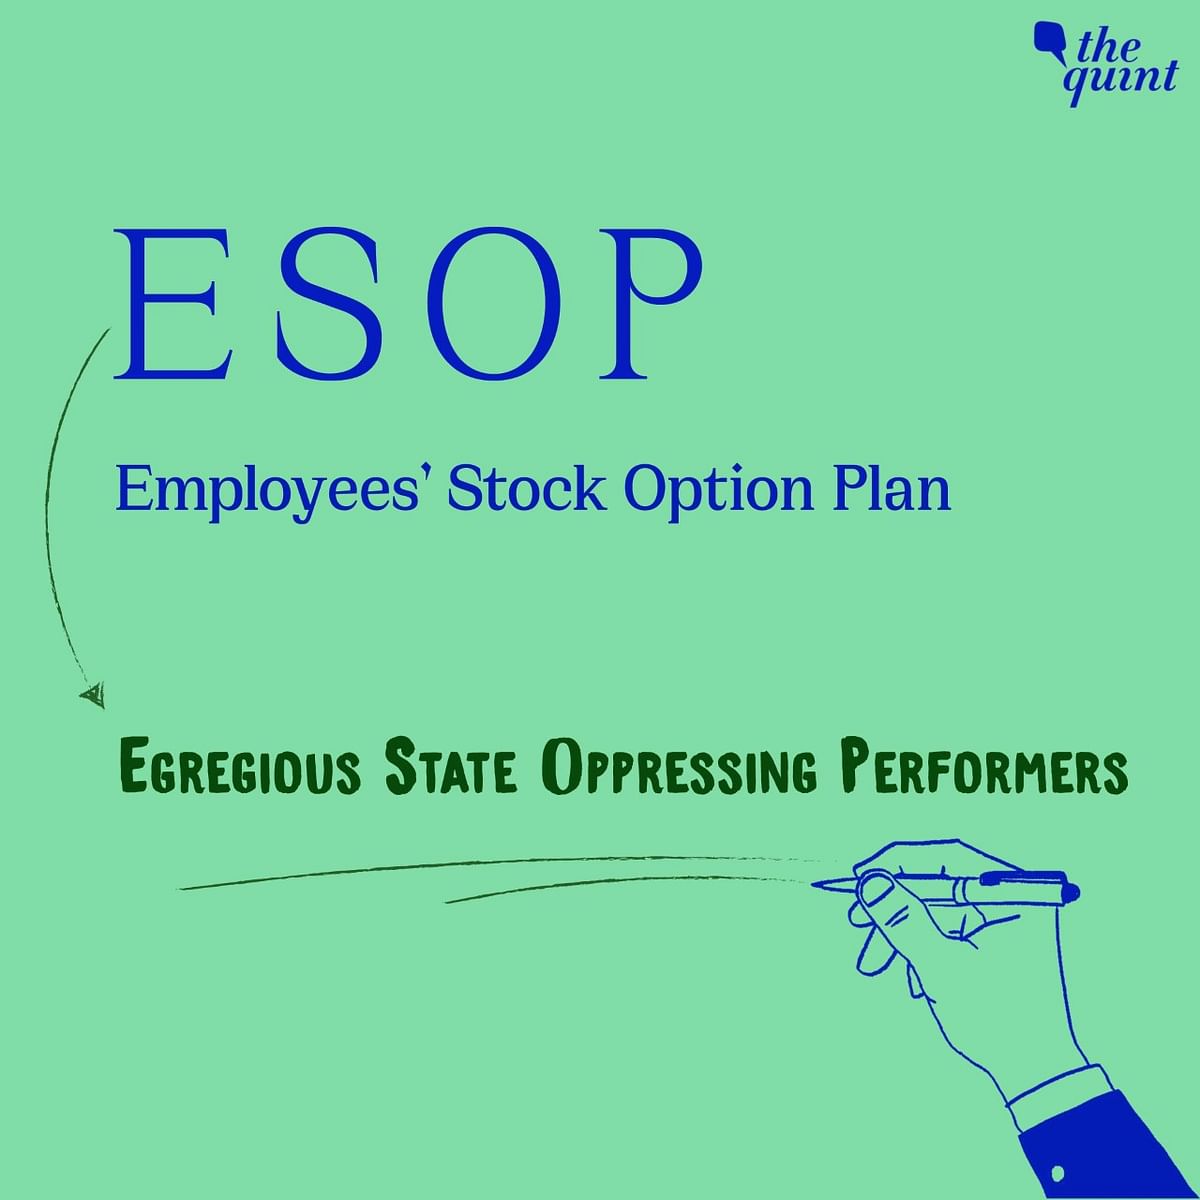  ESOP continues to be a much-abused acronym. As it stands, it expands to an Egregious State Oppressing Performers!